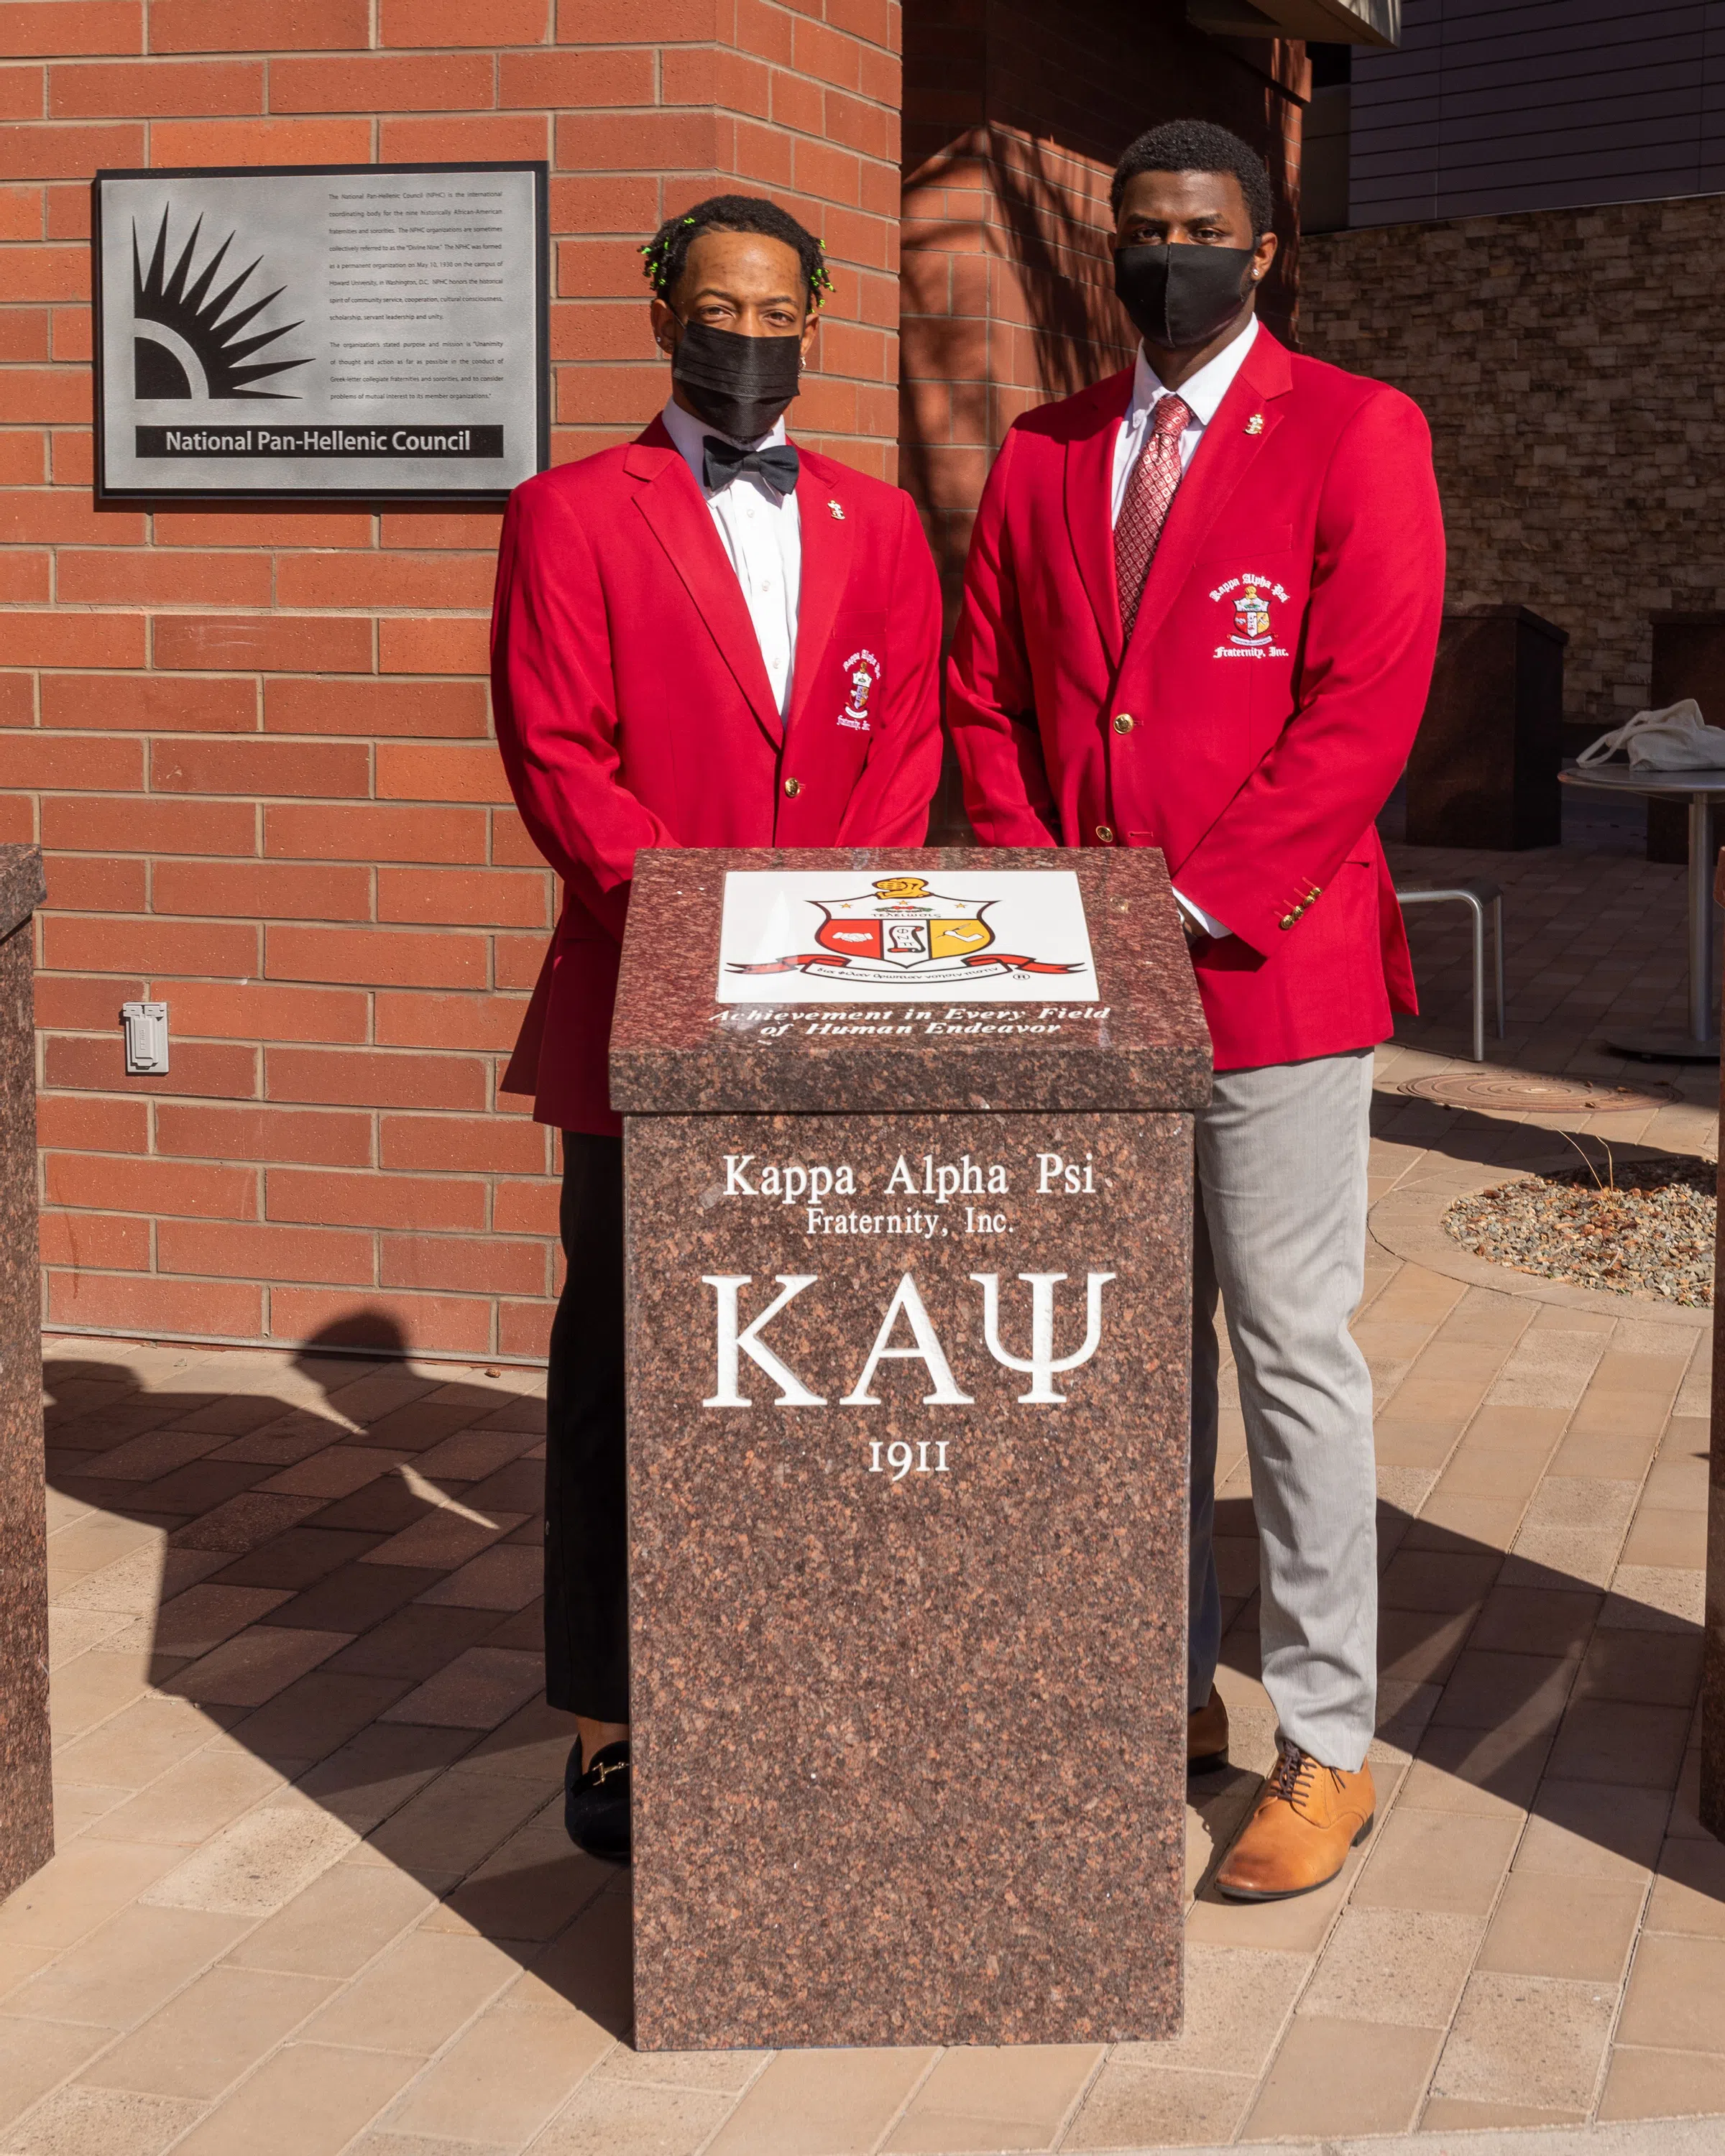 Two representatives from the Kappa Alpha Psi fraternity stand next to their plaque wearing their fraternity's red blazers. 